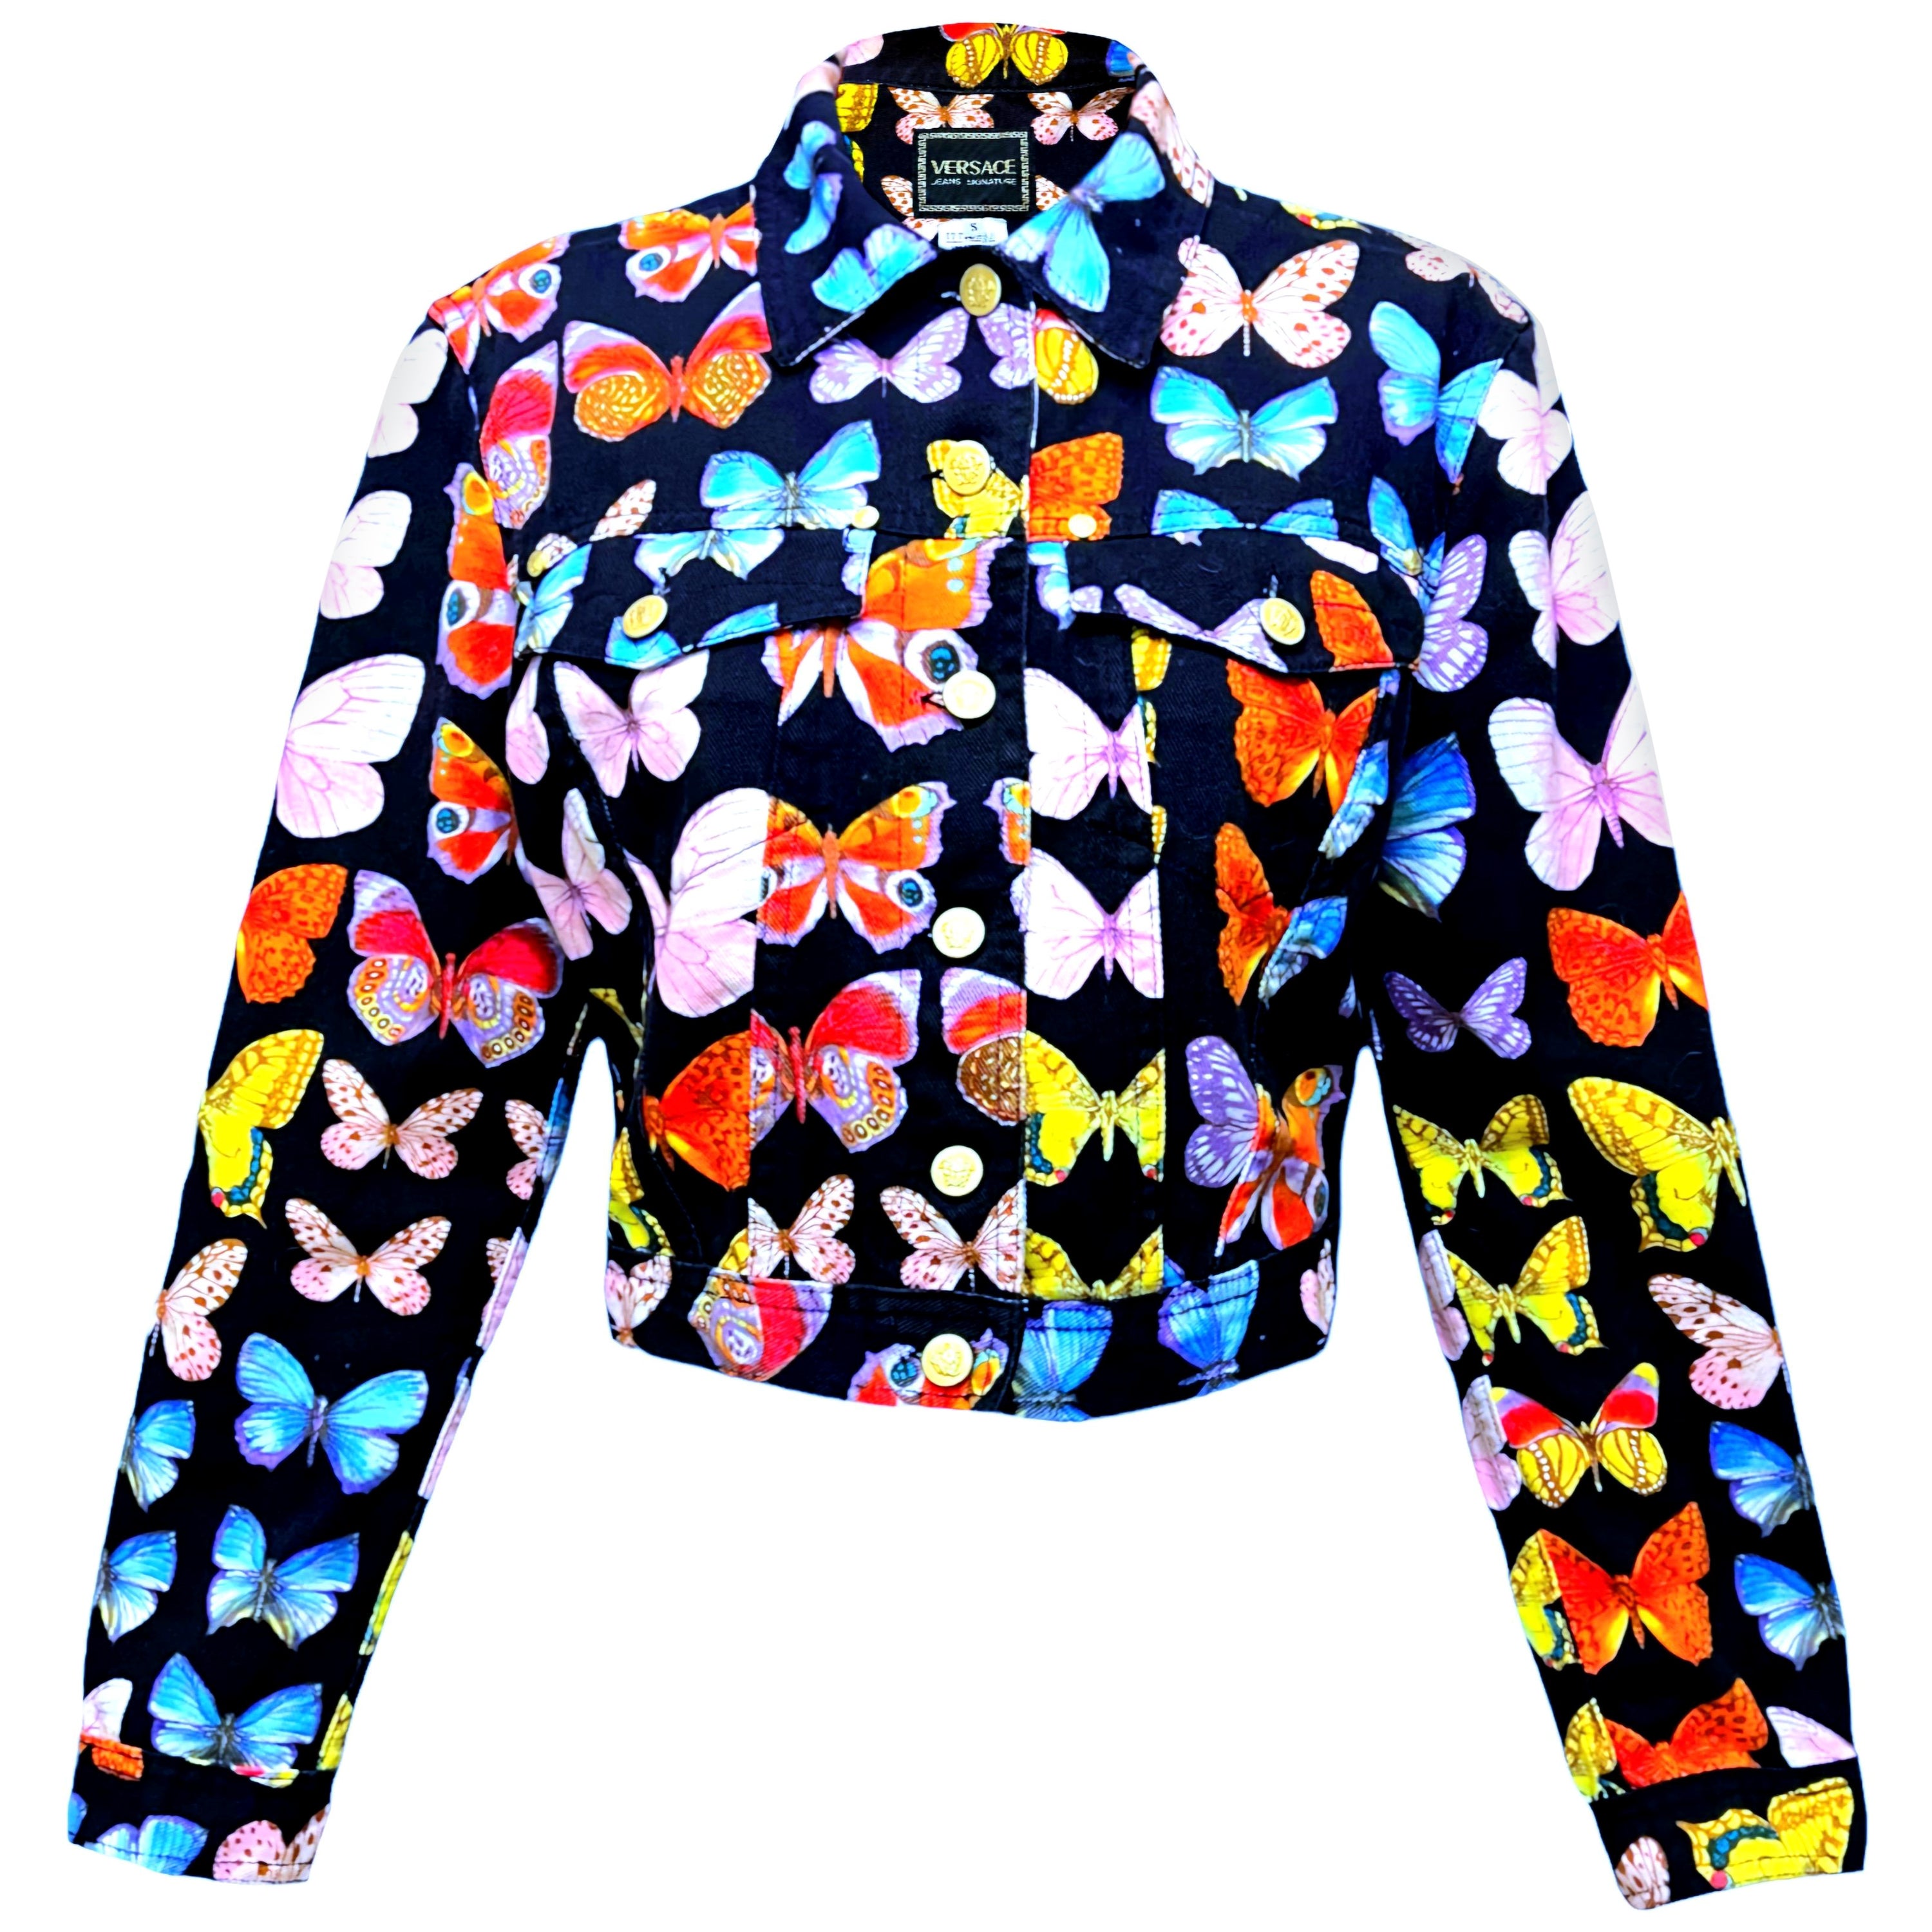 S/S 1995 Gianni Versace Butterfly Printed Jacket For Sale